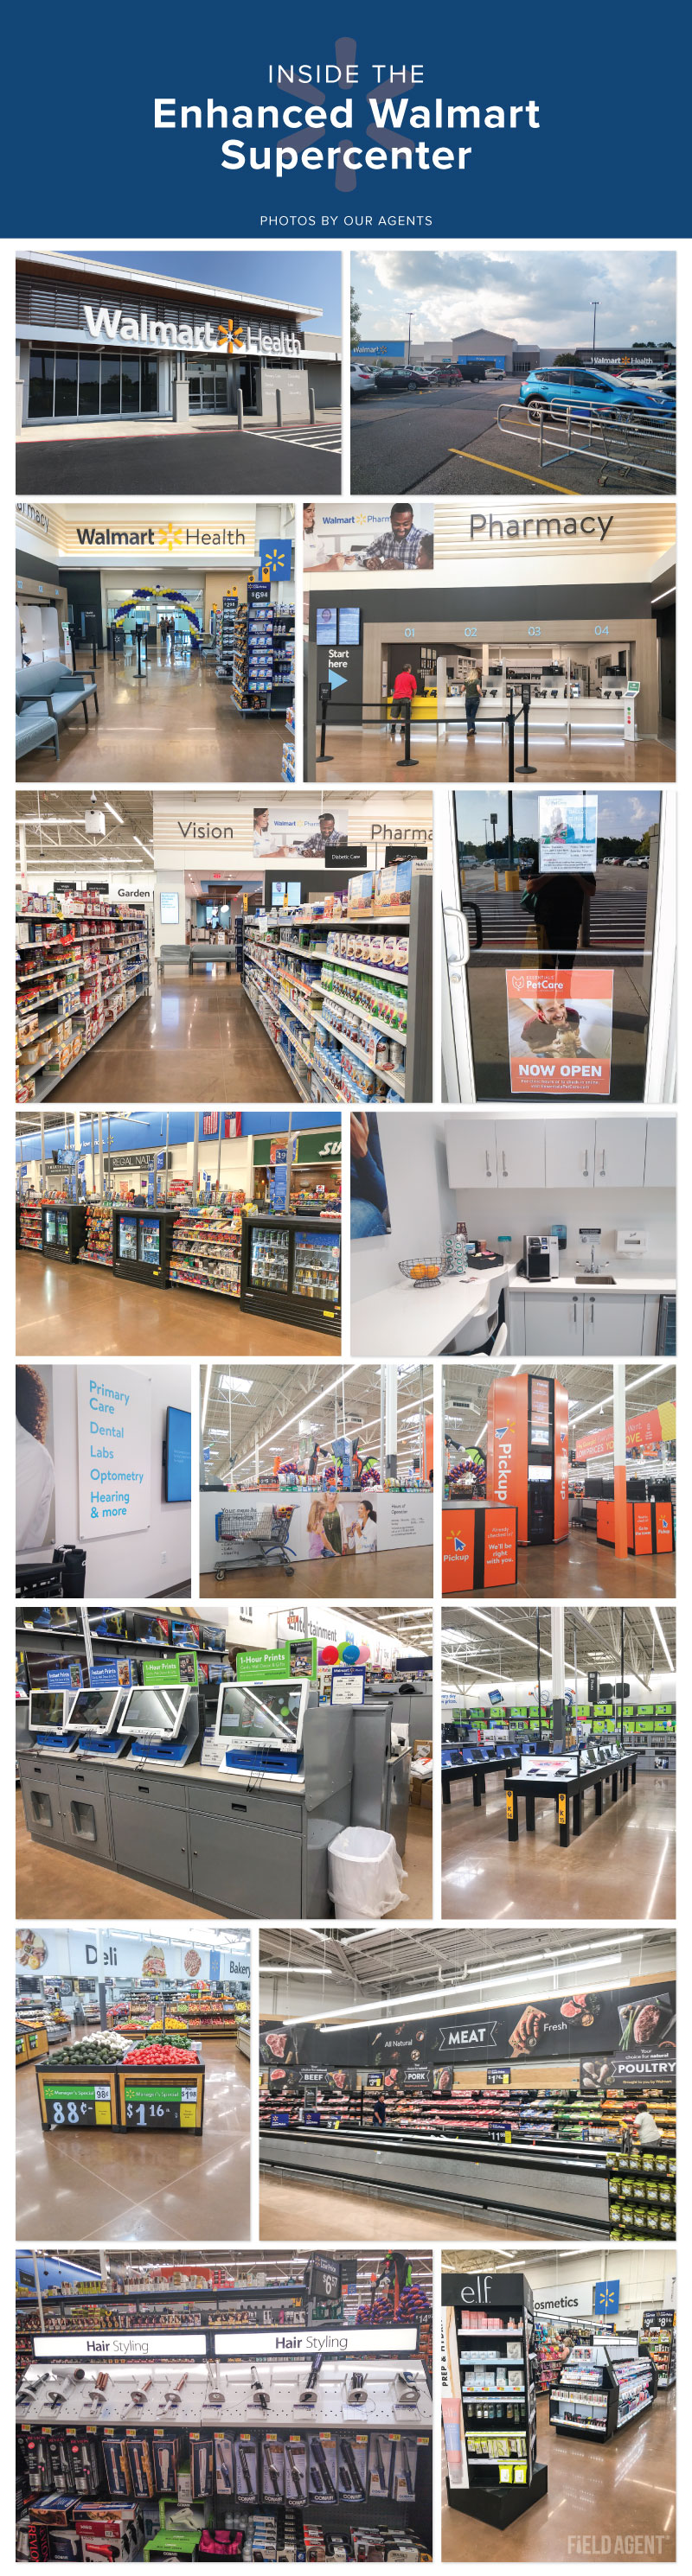 Photo Gallery: Shoppers Show Off Walmart's New, Enhanced Supercenter walmart supercenter supermercado shoppers coto laurel